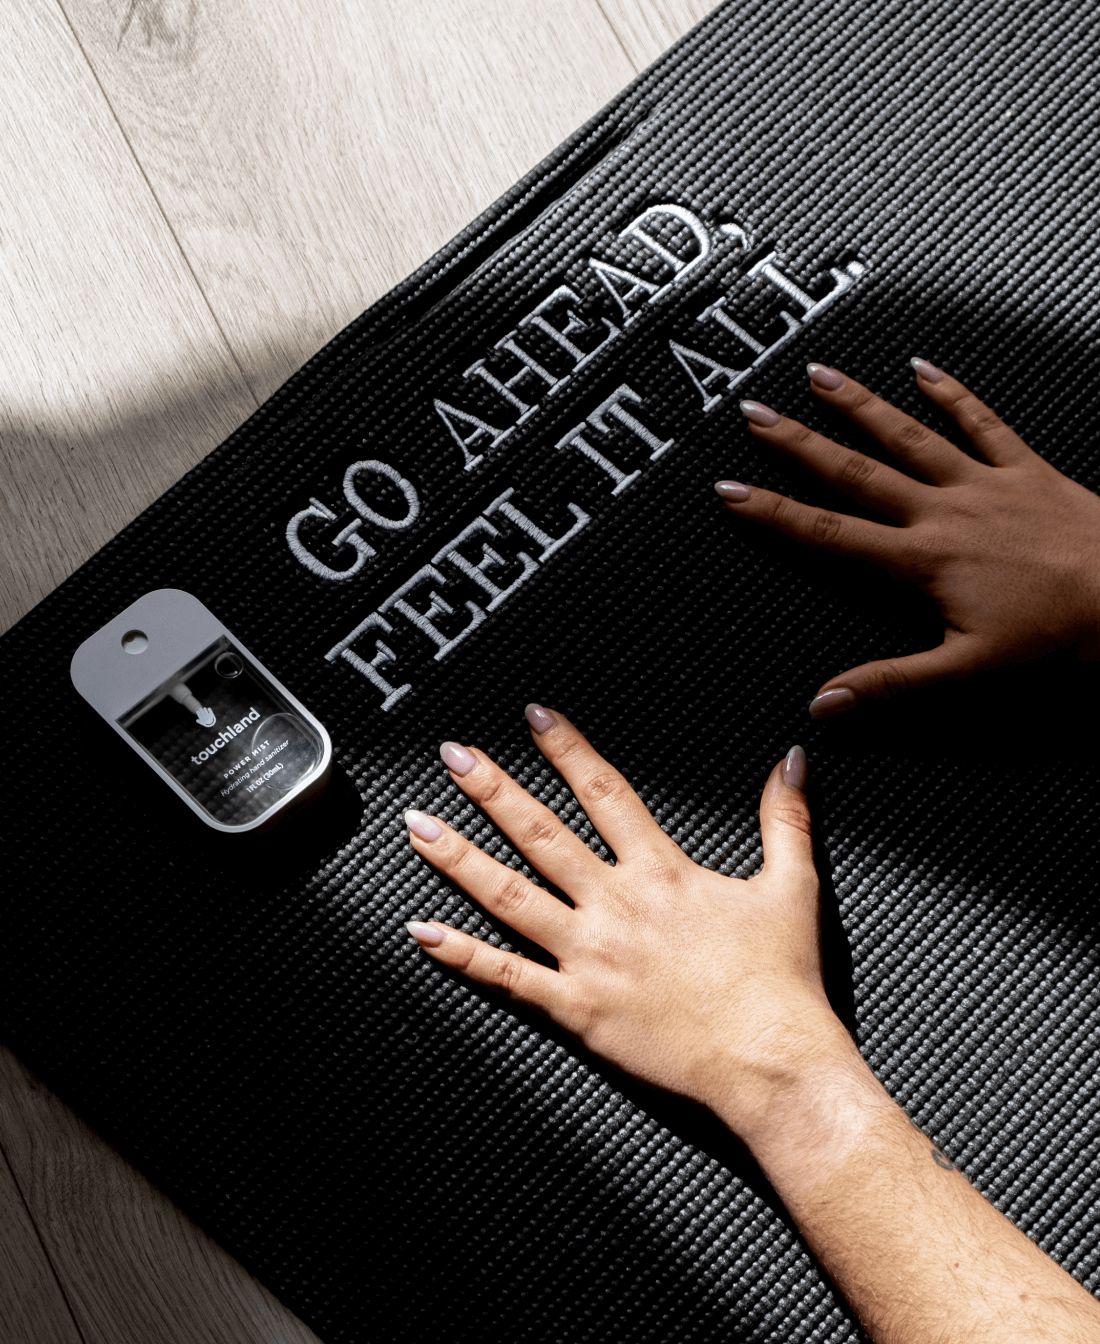 A Power Mist laying on a yoga mat that say 'Go Ahead, Feel It All'